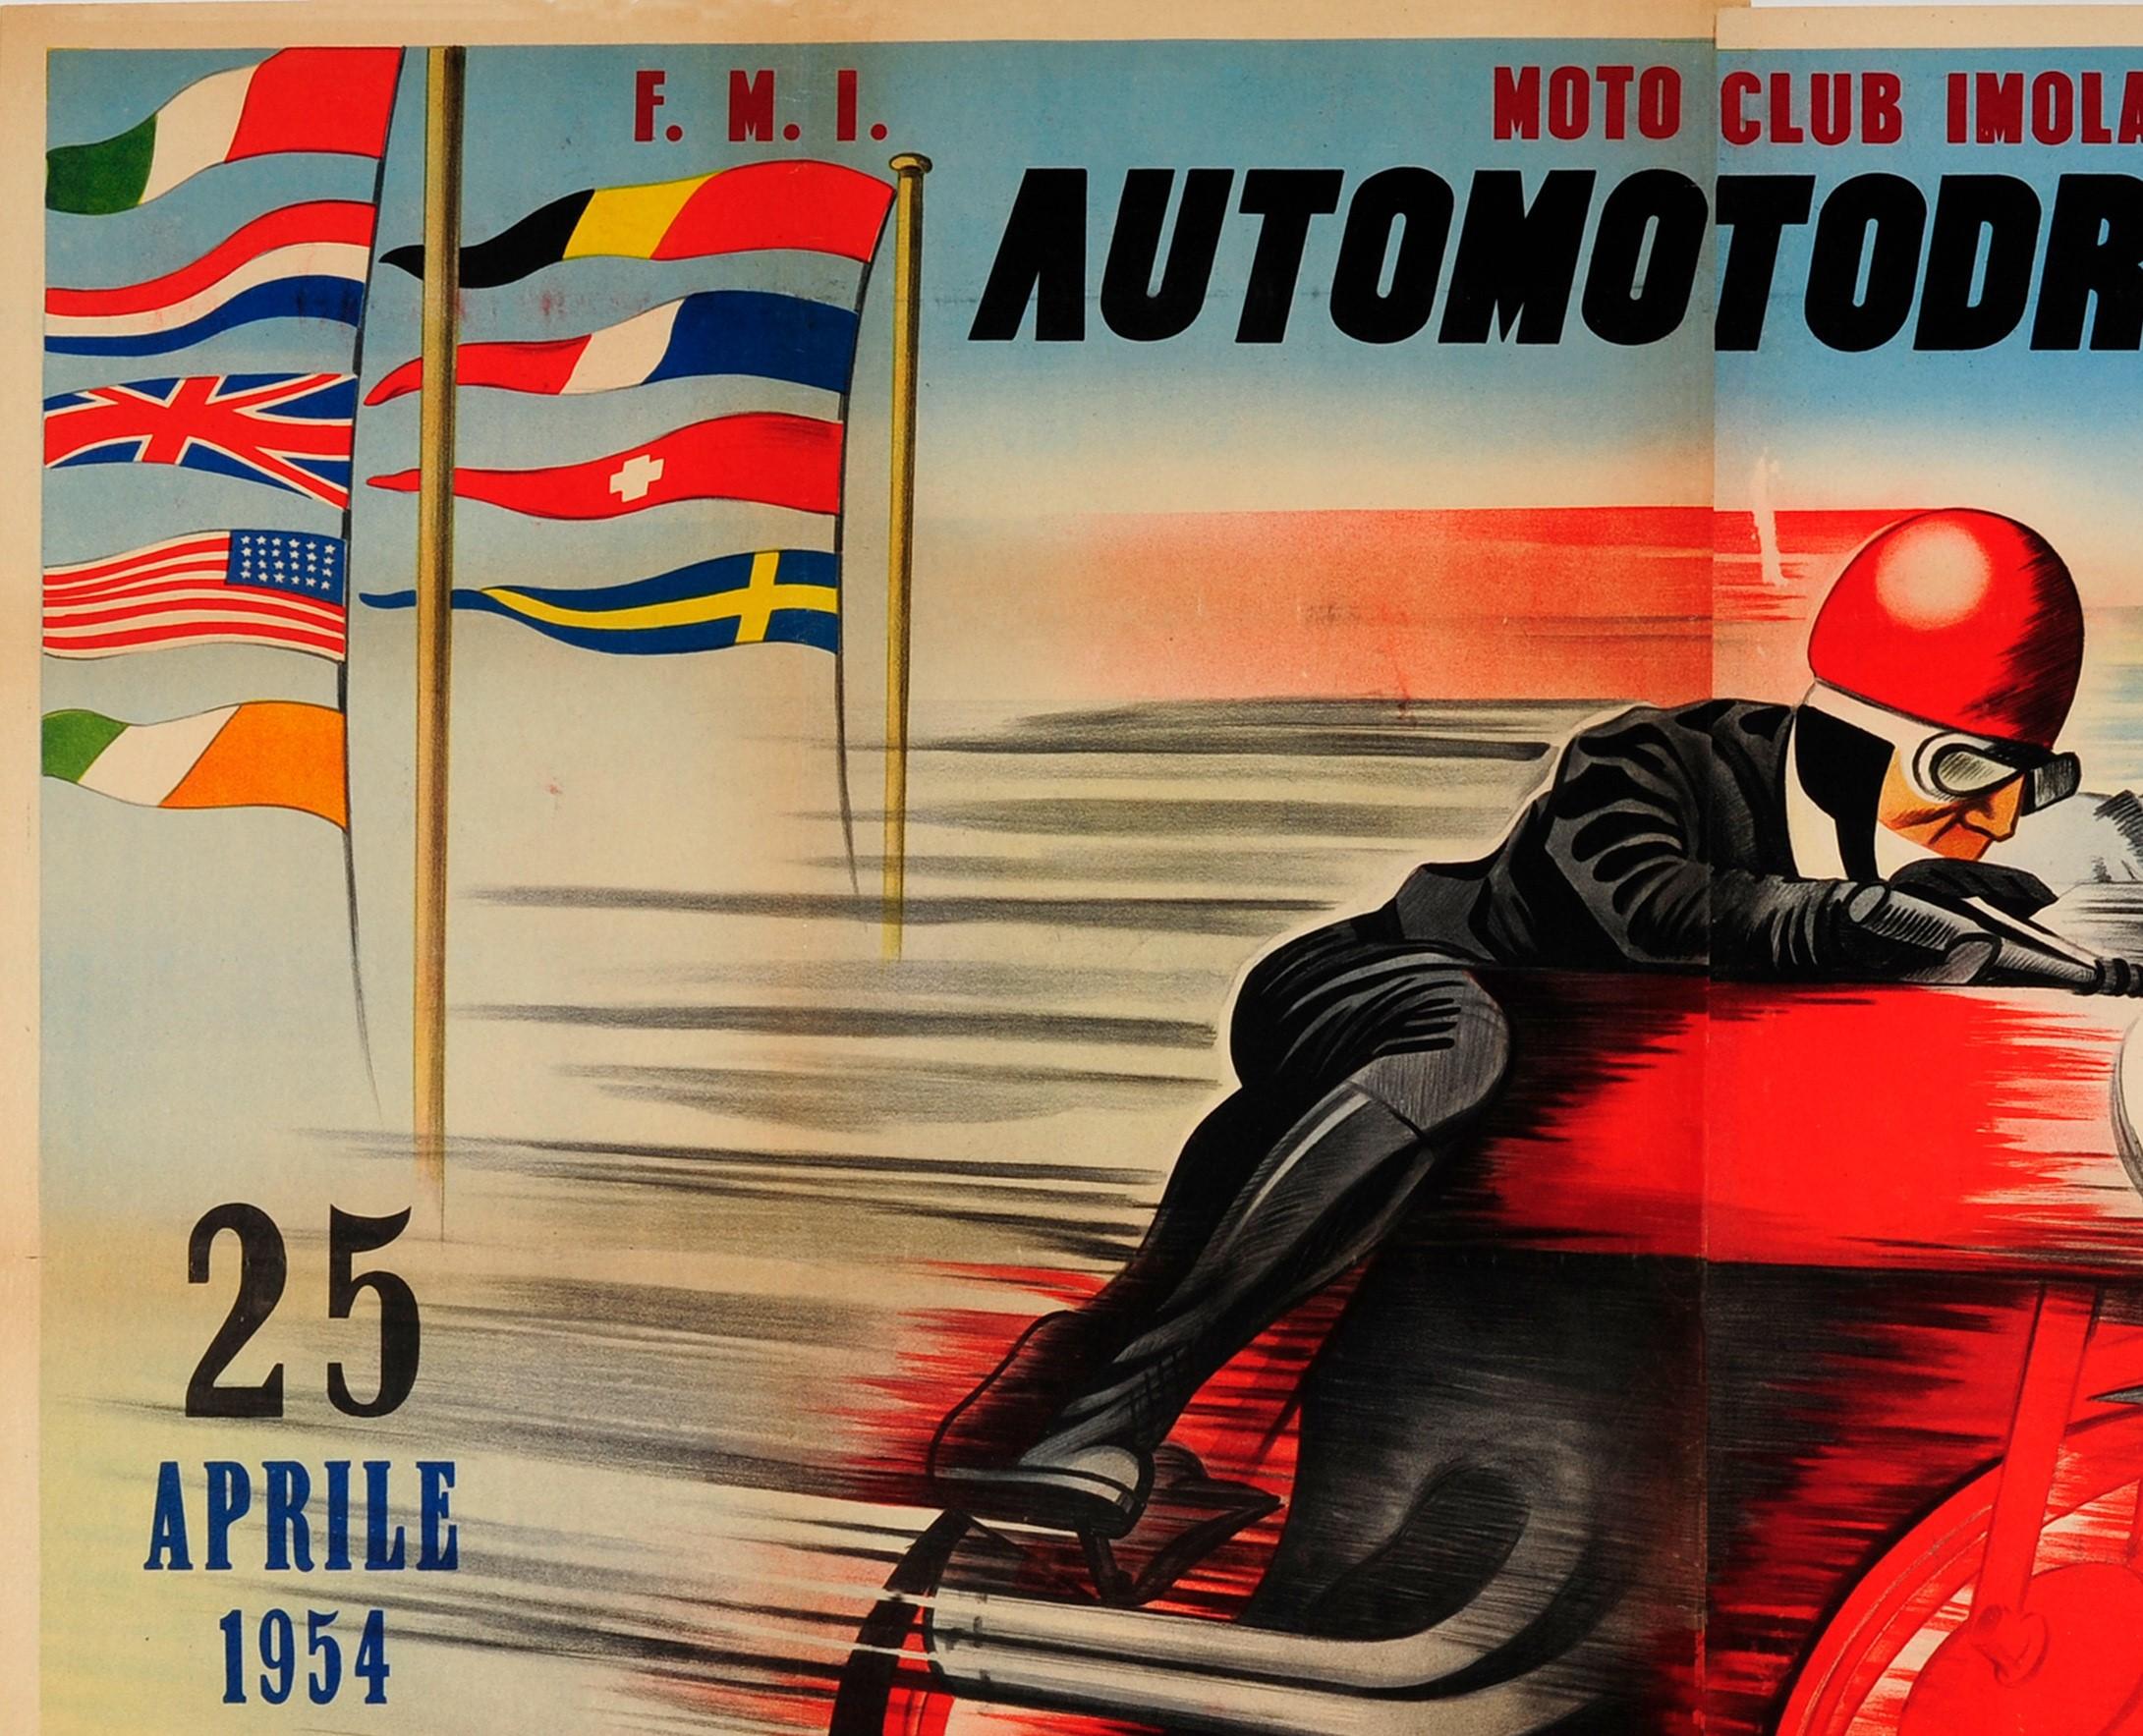 Original Vintage Motorcycle Racing Poster For Automotodromo Di Imola Coppa D'Oro - Print by Unknown